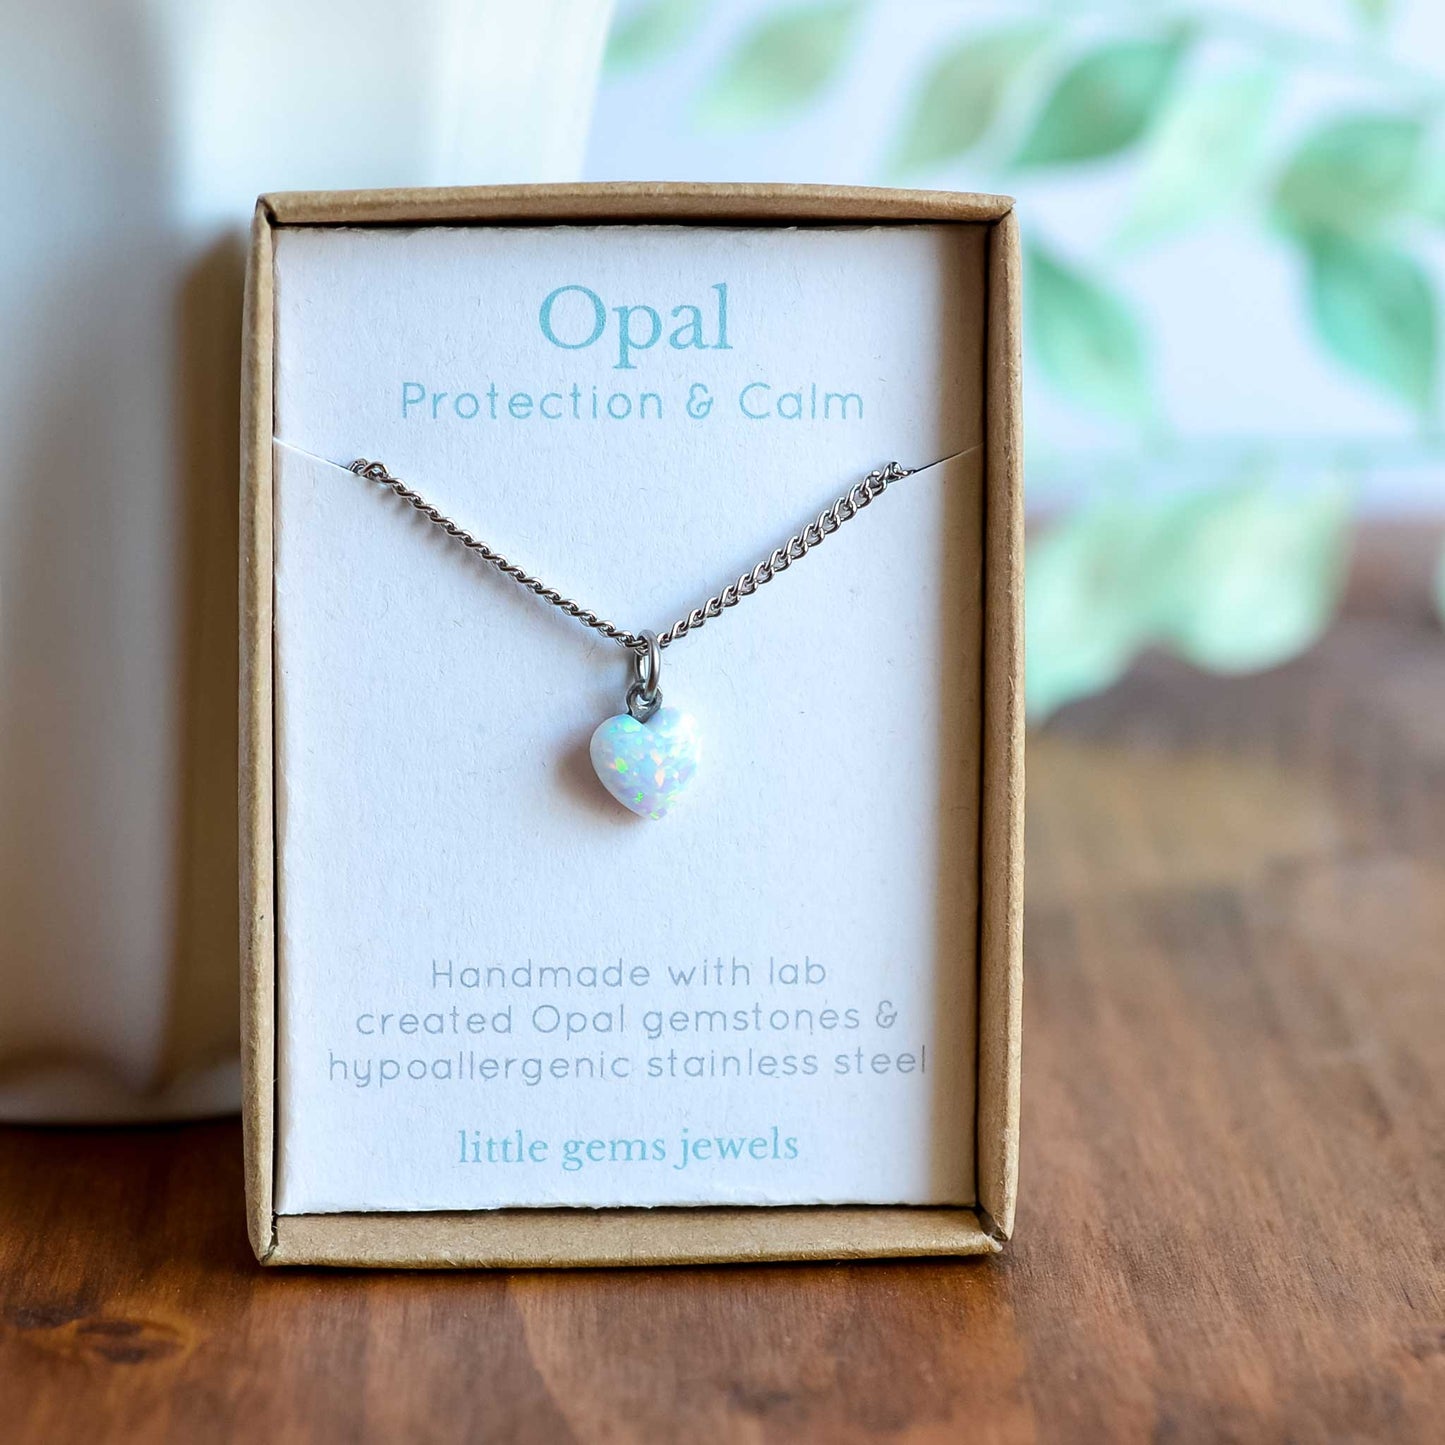 White lab created Opal heart pendant necklace in gift box